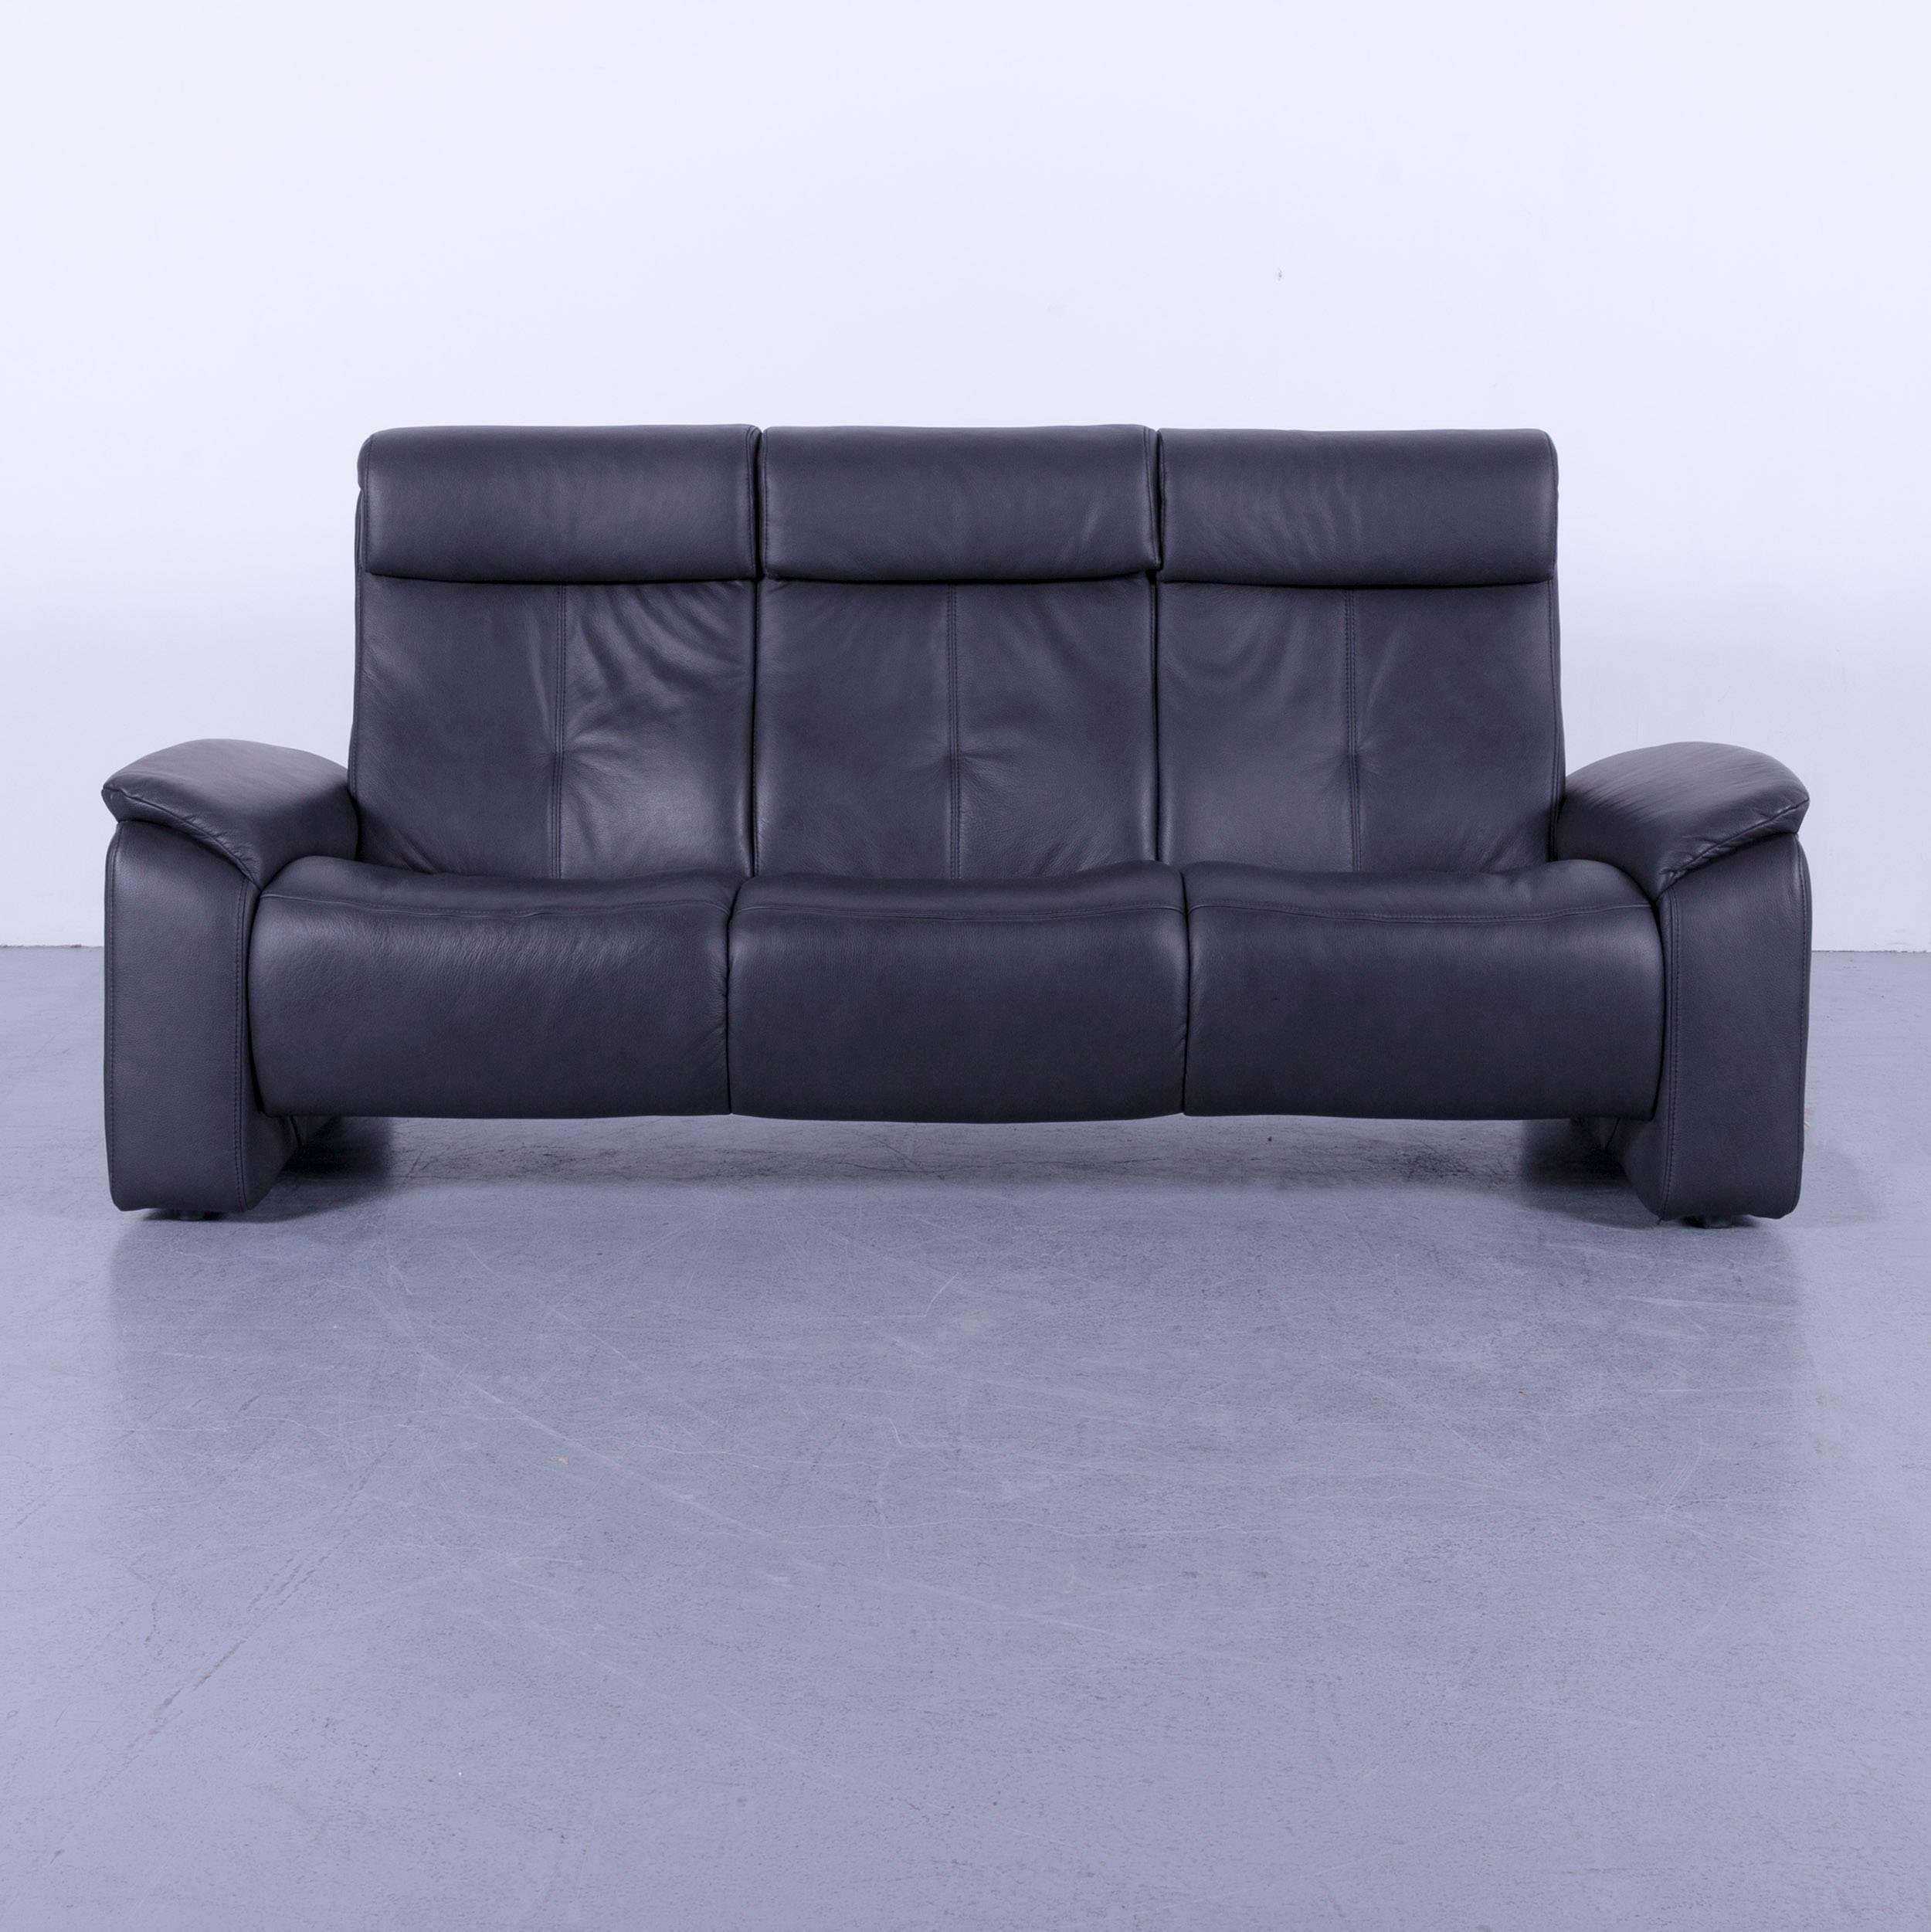 We bring to you an Himolla leather sofa black three-seat couch.
































